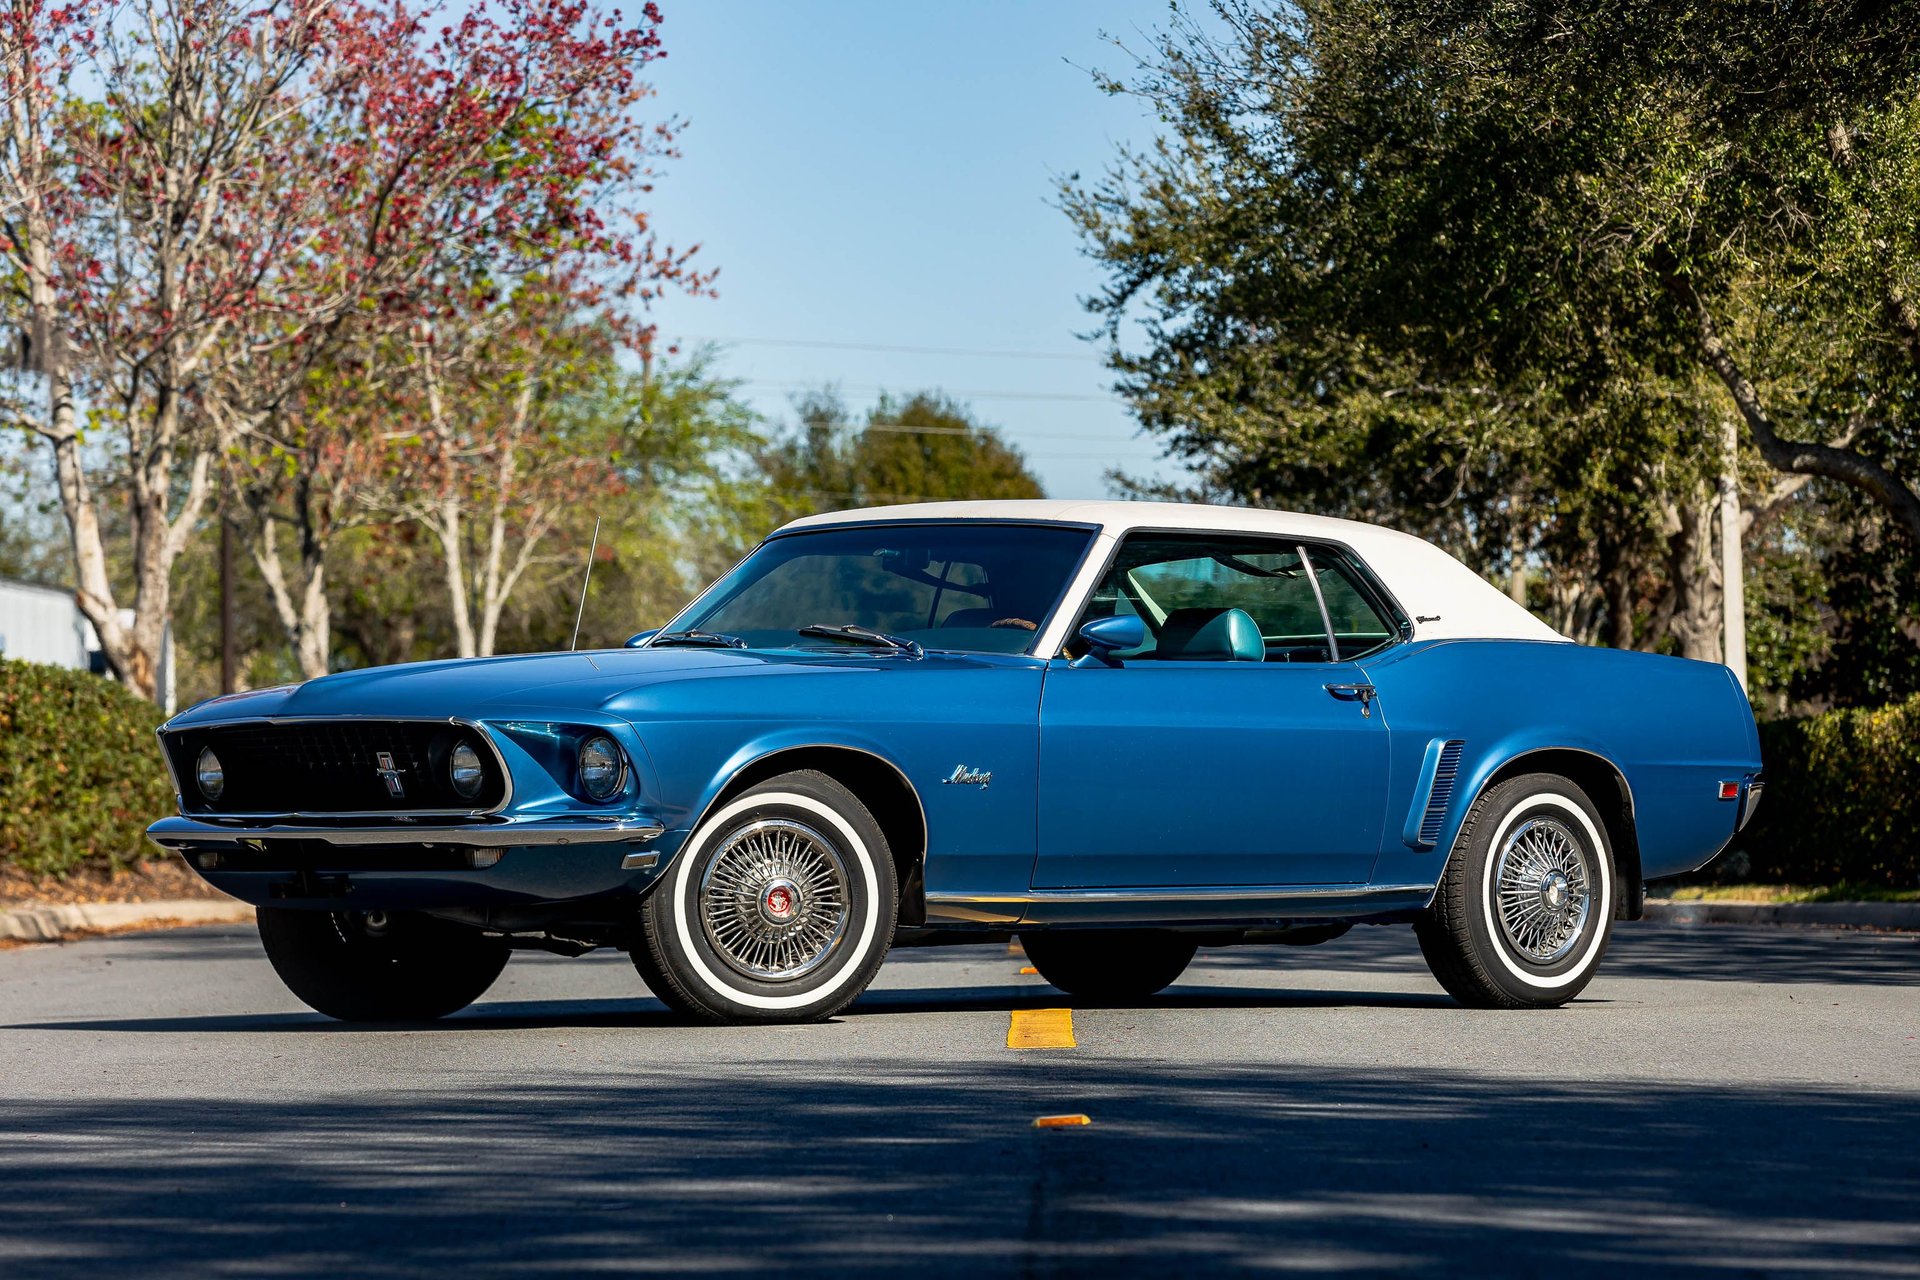 Mustang Of The Day: 1969 Ford Mustang Grande